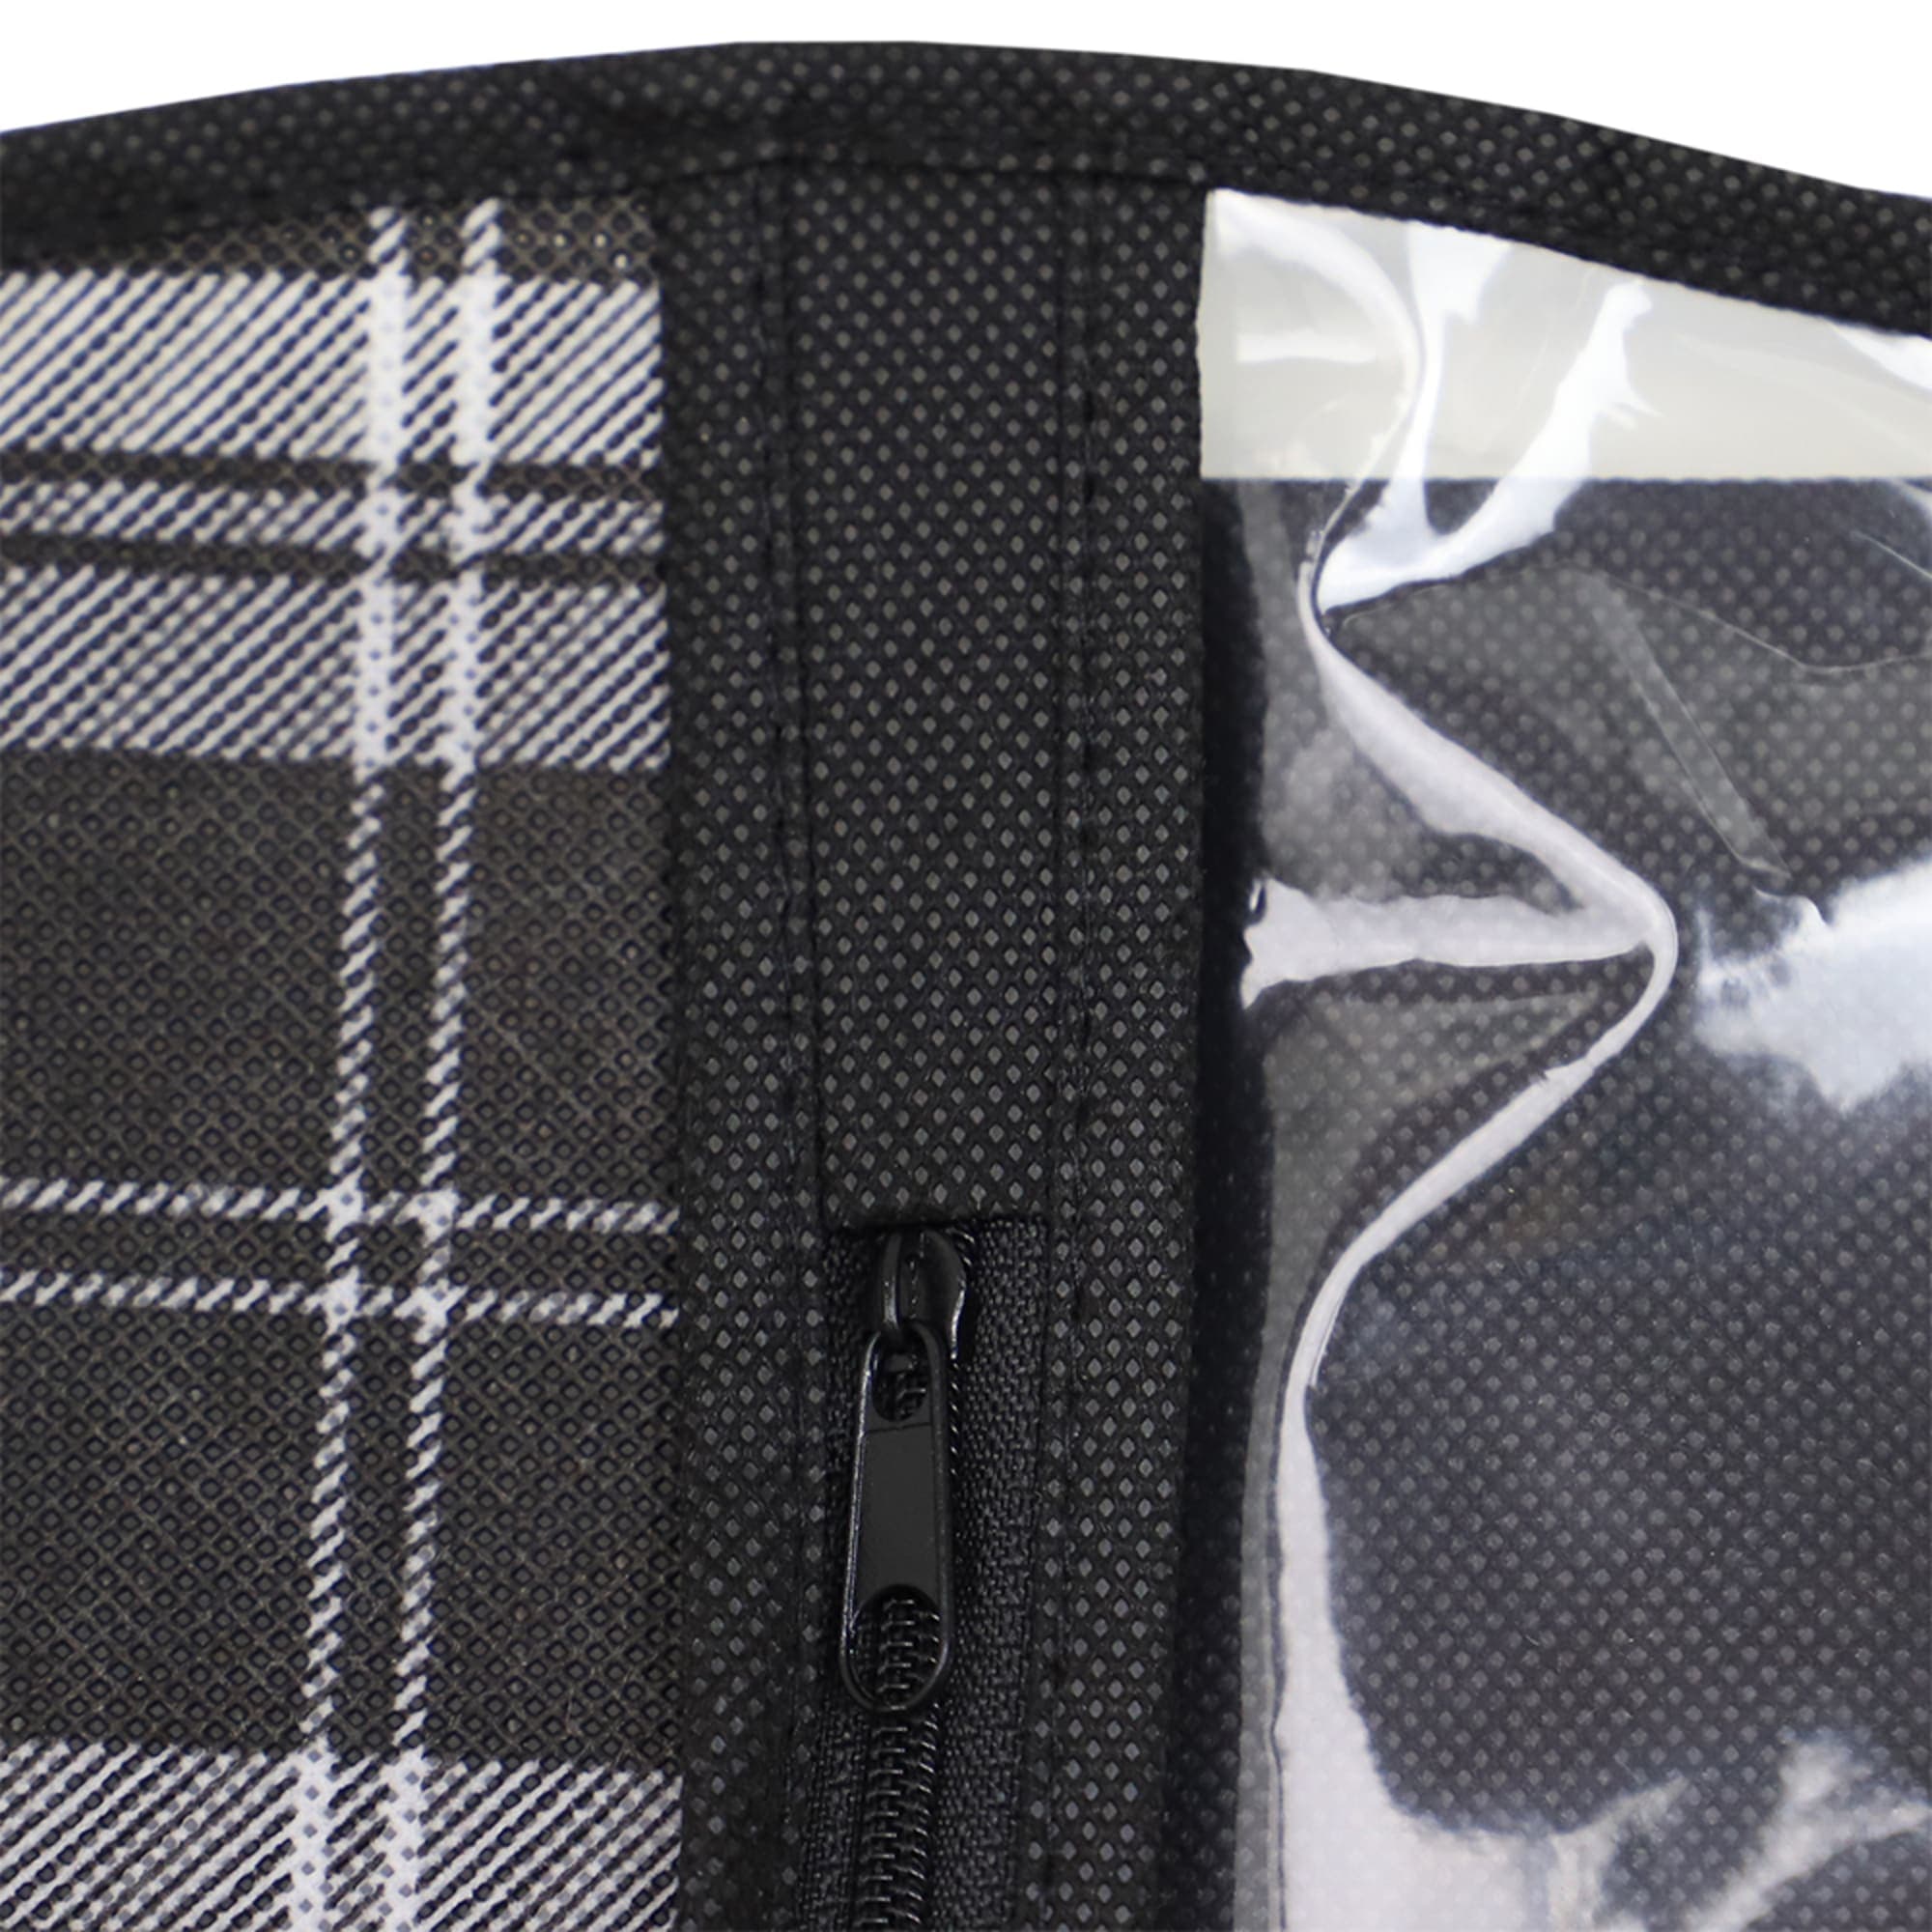 Home Basics Plaid Non-Woven Garment Bag with Clear Plastic Panel, Black
 $3.00 EACH, CASE PACK OF 12